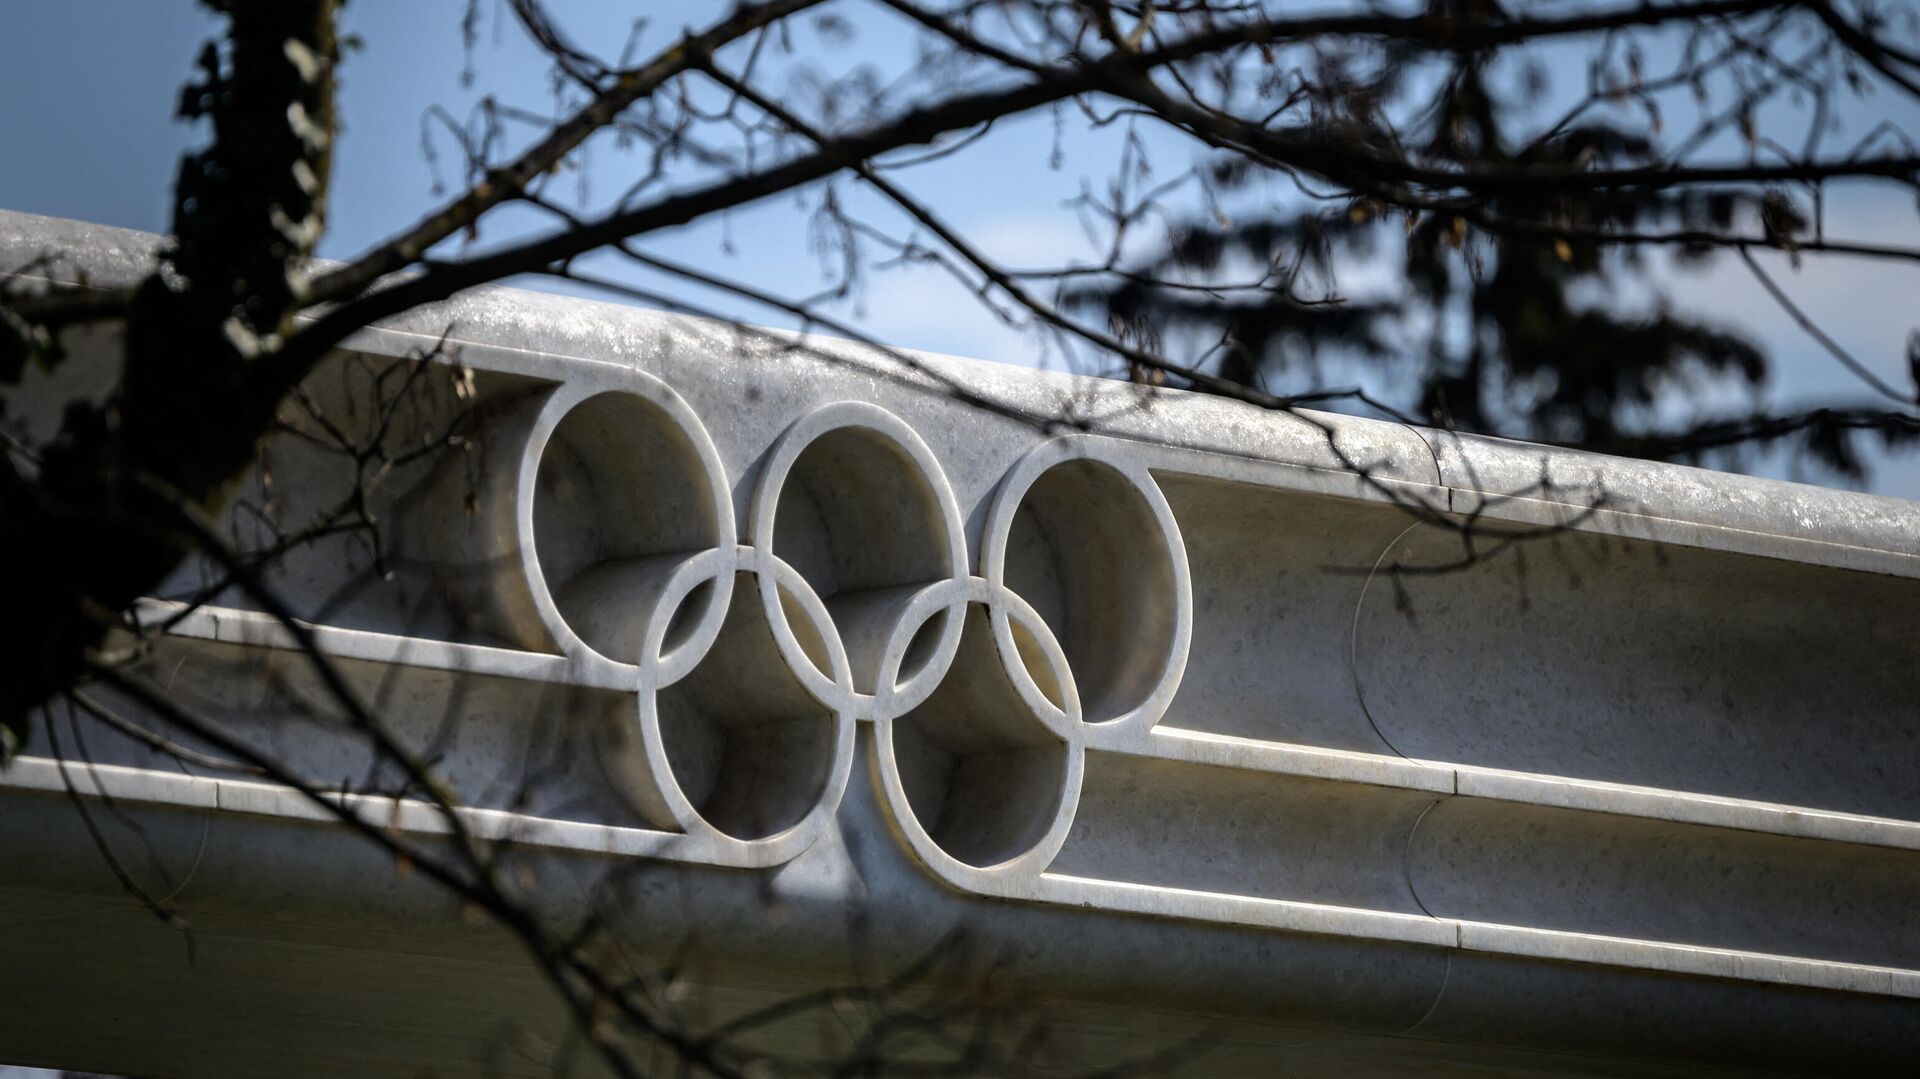 A picture taken on March 8, 2021 in Lausanne shows the Olympic rings next to the headquarters of the International Olympic Committee (IOC) ahead of a session of the World's sport governing body held virtually. (Photo by Fabrice COFFRINI / AFP) - РИА Новости, 1920, 09.03.2021